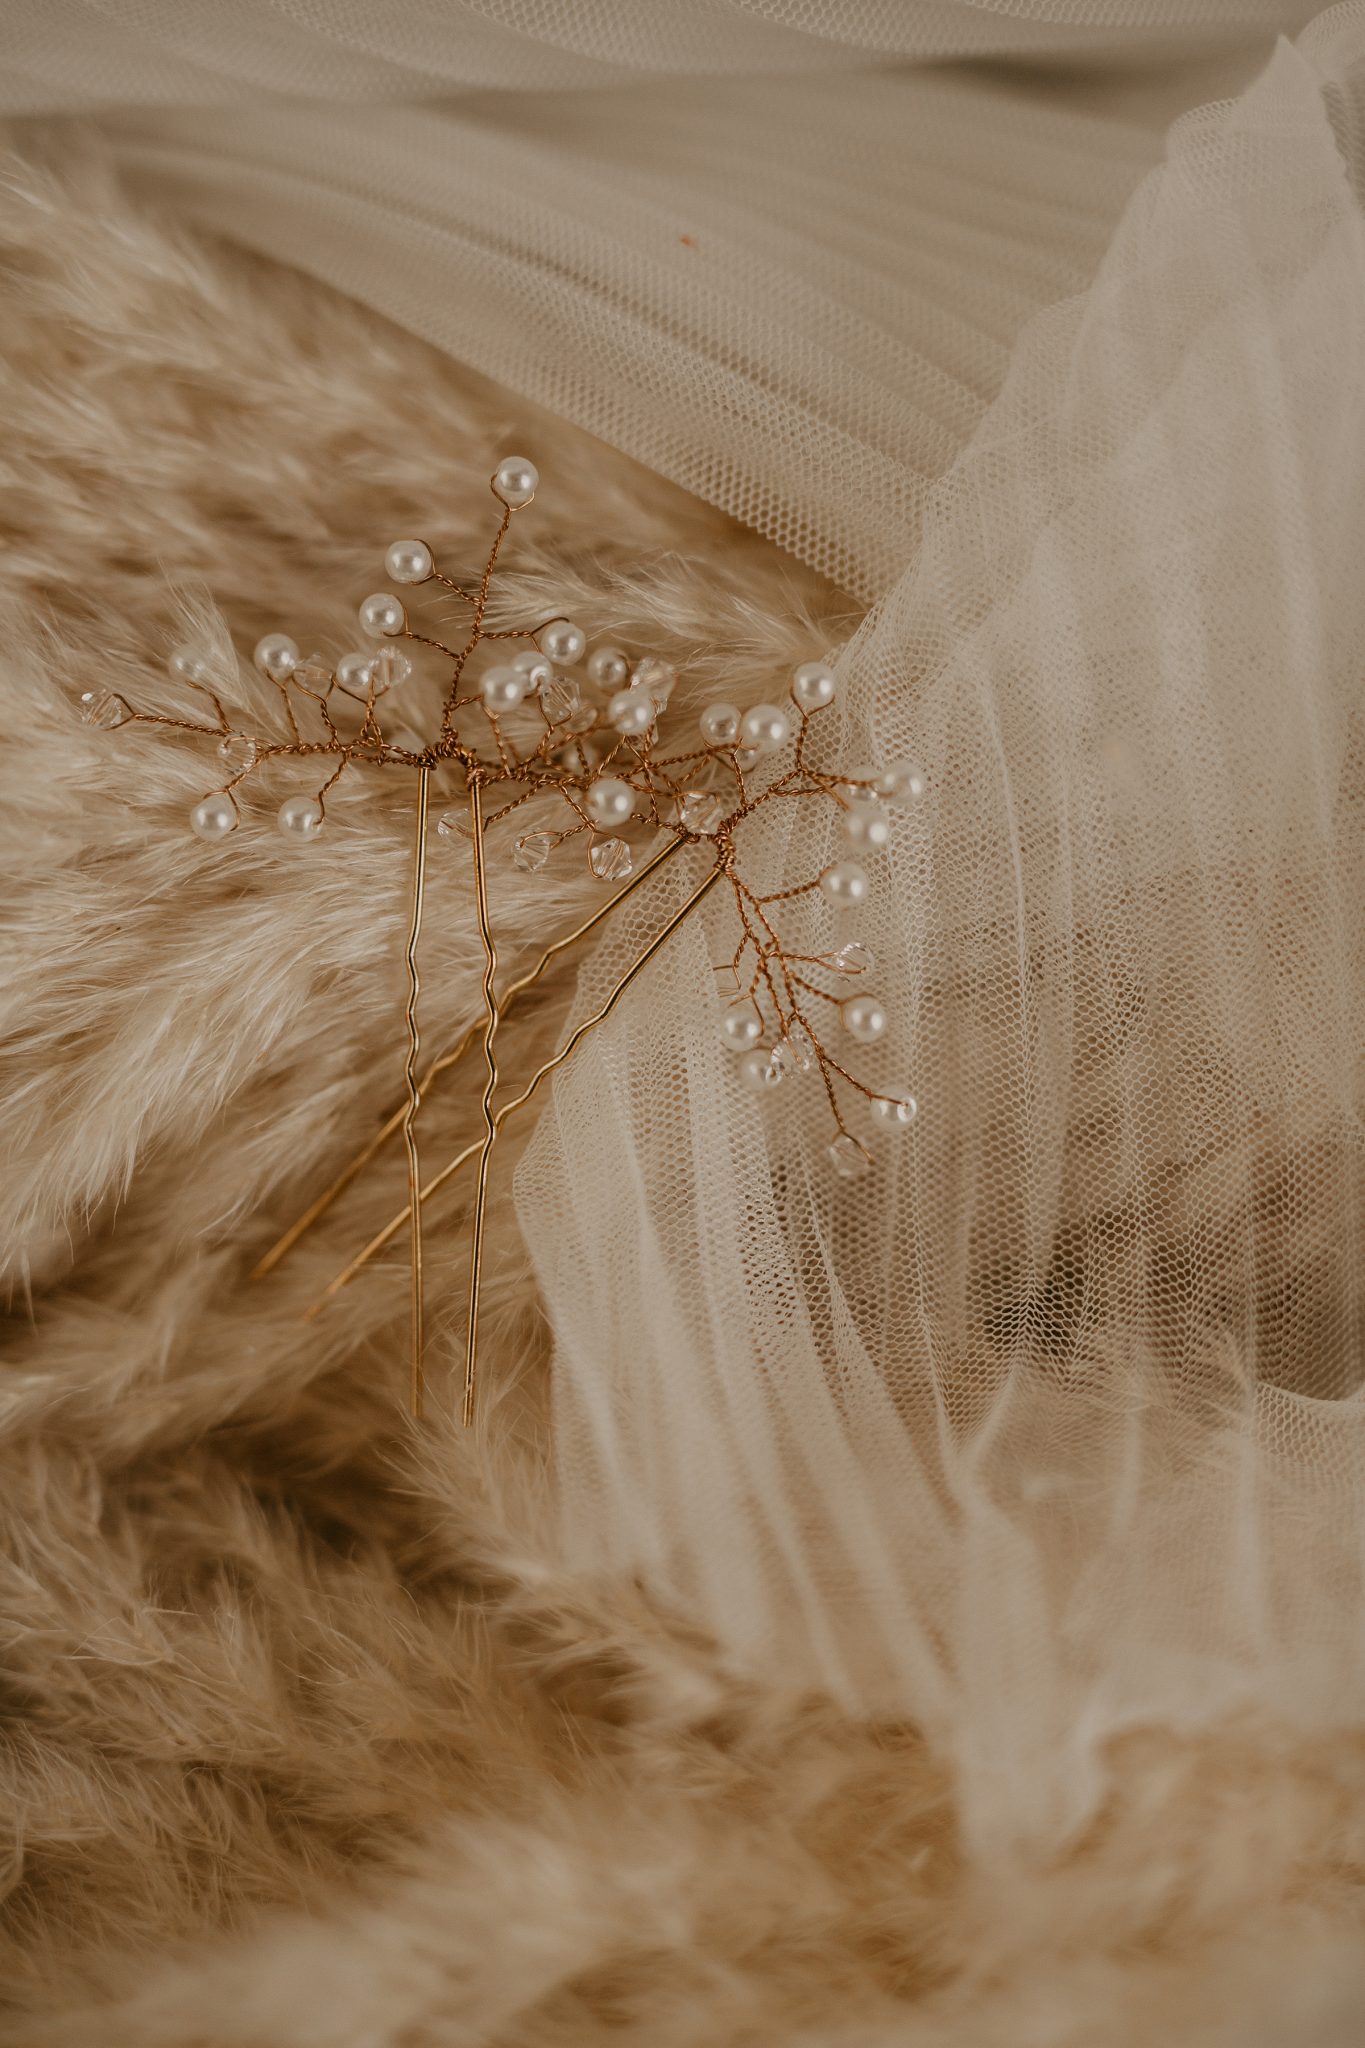 Bridal Minimalism Feature on Bronte Bride: Delica Bridal Shares All About New Bridal Trends & Dress Shopping During Covid, bridal accessories, hair pins, hair accessories